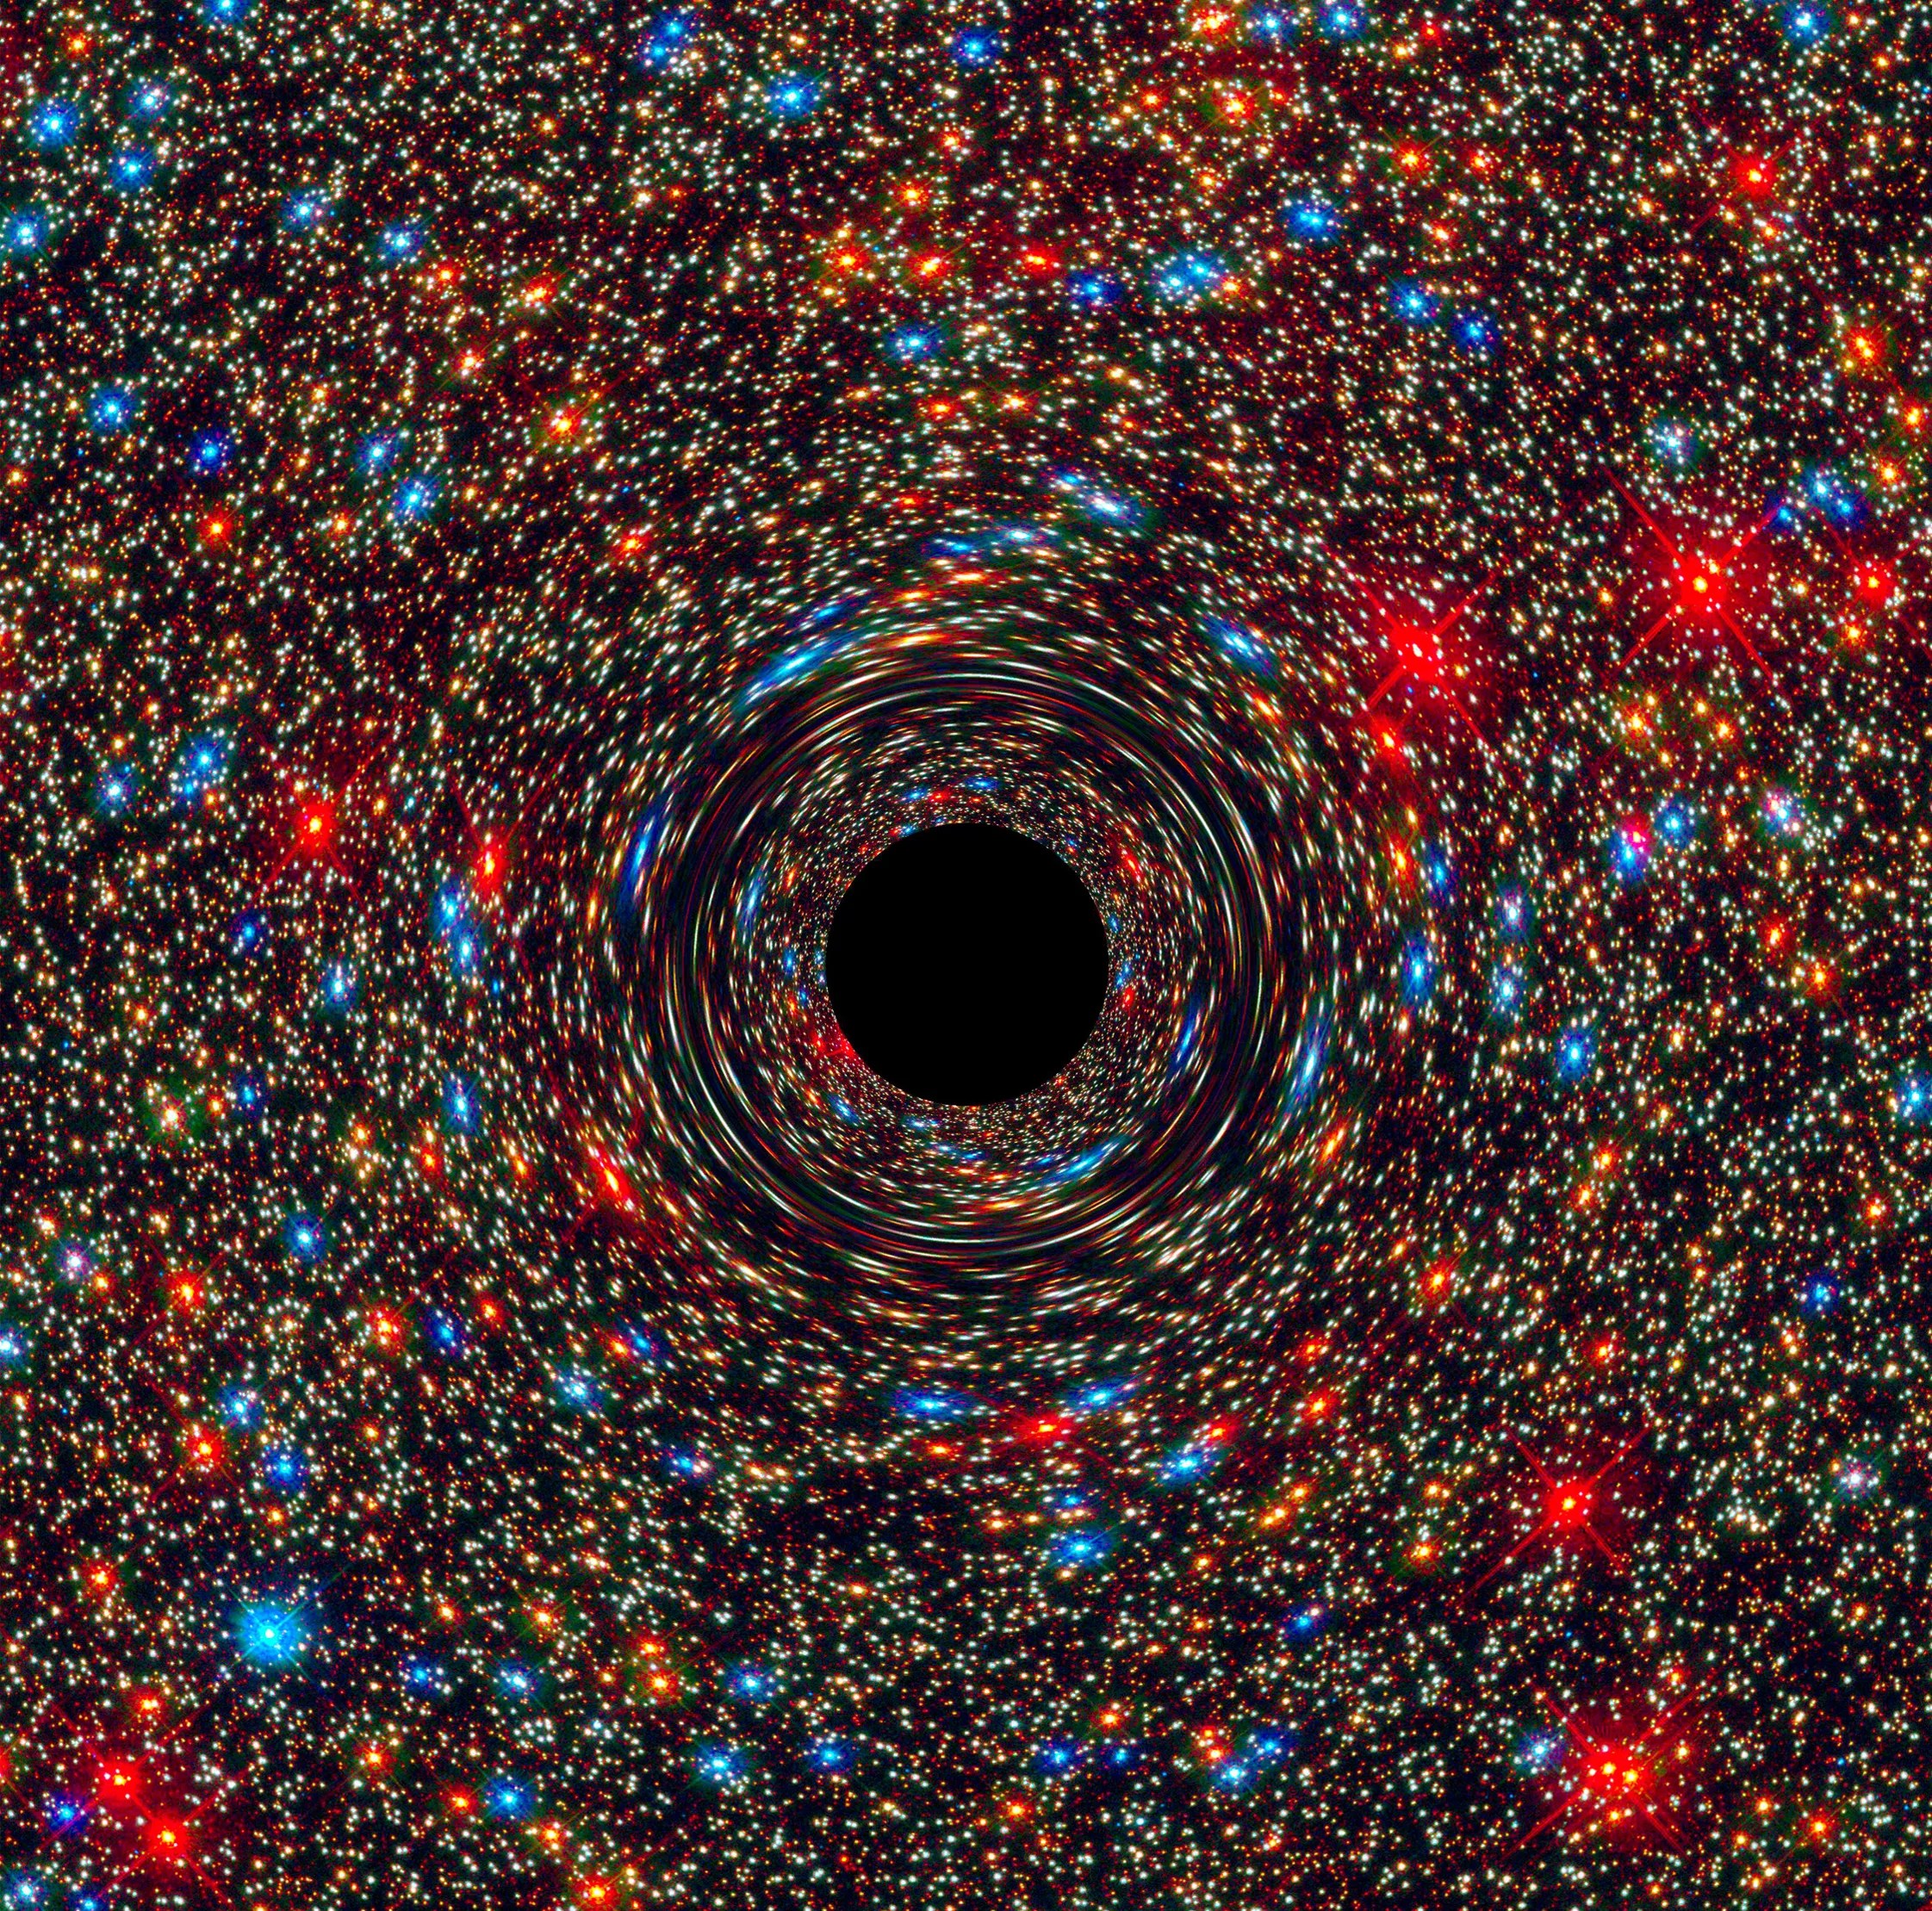 Computer simulation of a supermassive black hole at the core of a galaxy. Center is a black circle. Surrounding the black circle are arcs of red, blue, orange, and white. Further out from the circle are blotches of red, blue, orange, and white representing celestial objects. 